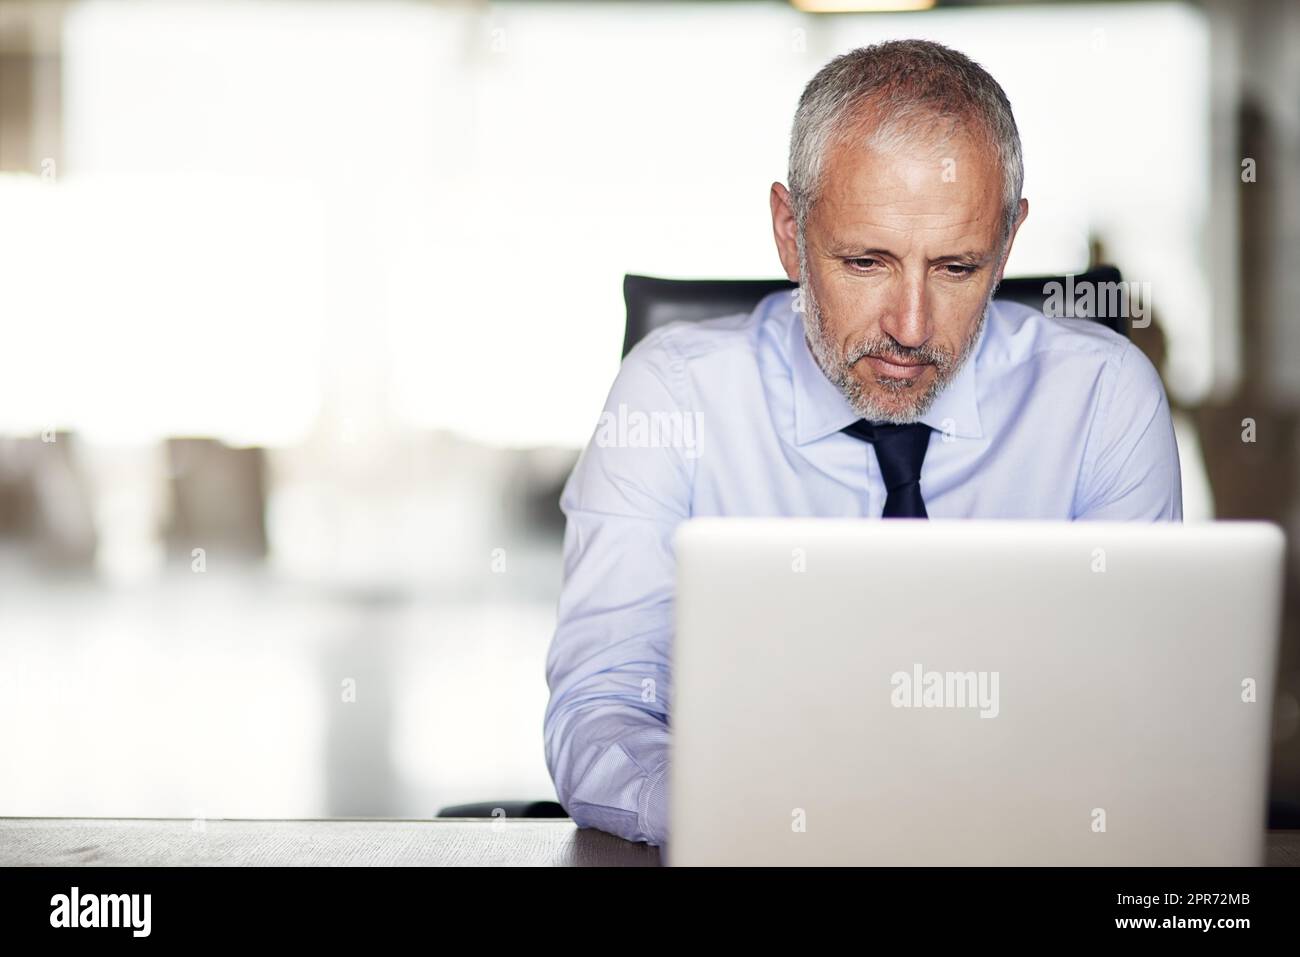 Building his business empire. Cropped shot of a mature businessman working in his office. Stock Photo